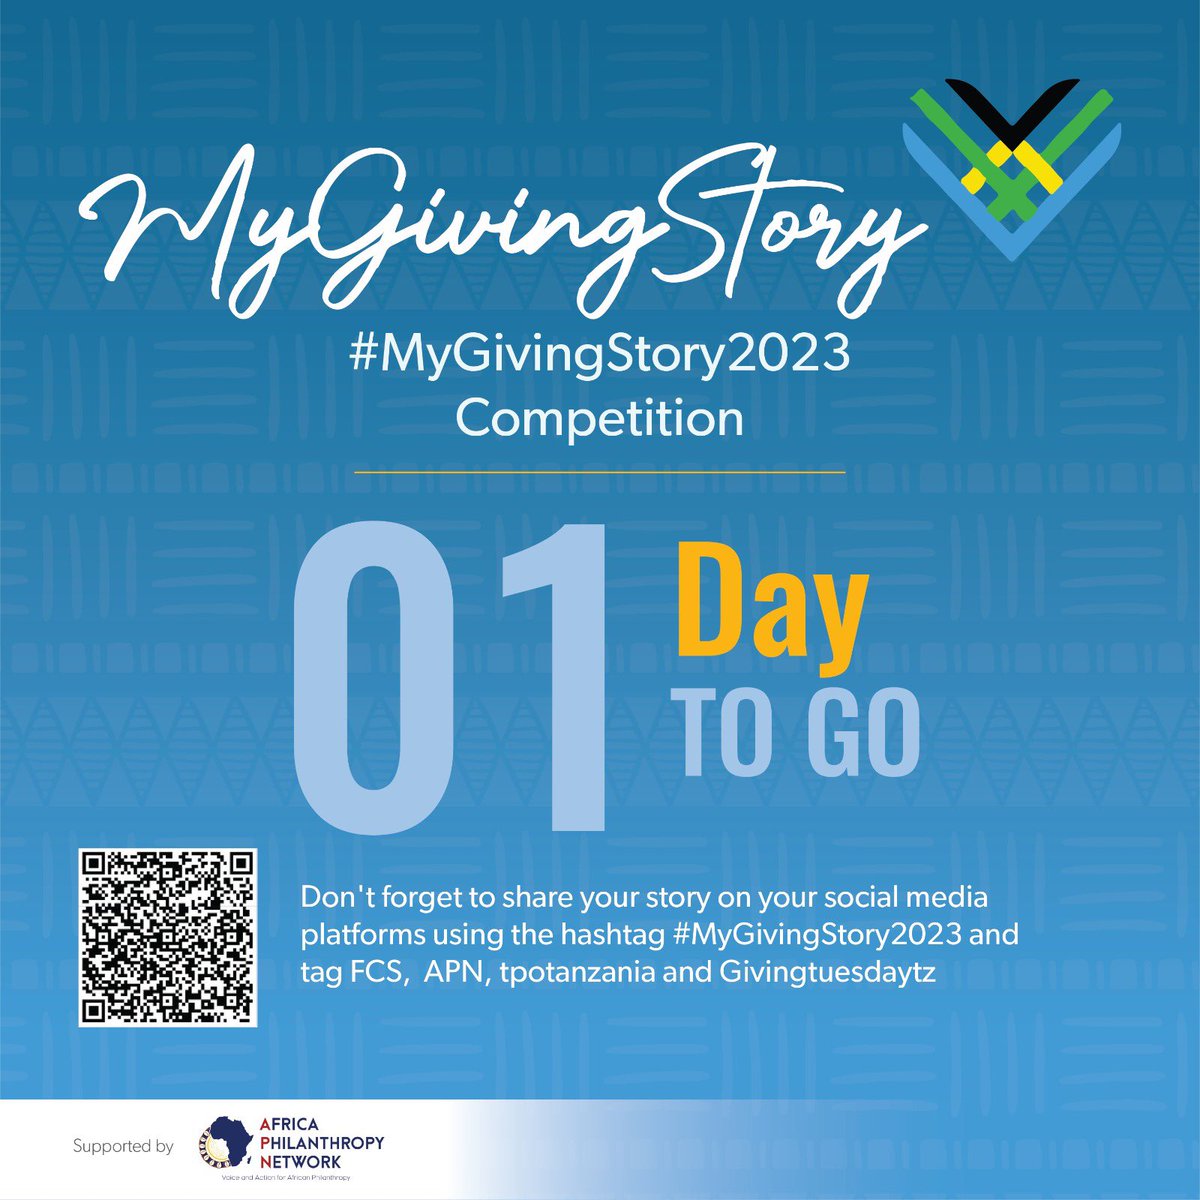 ⏱️ Final call! Just one day left to share your inspiring giving story and win up to $800 for your favorite charity. Don't miss this chance to make a difference. Submit your #MyGivingStory2023 now! 🤝✨ #YouthPhilanthropy @FCSTZ @InfoAPN @GivingTuesdayTZ